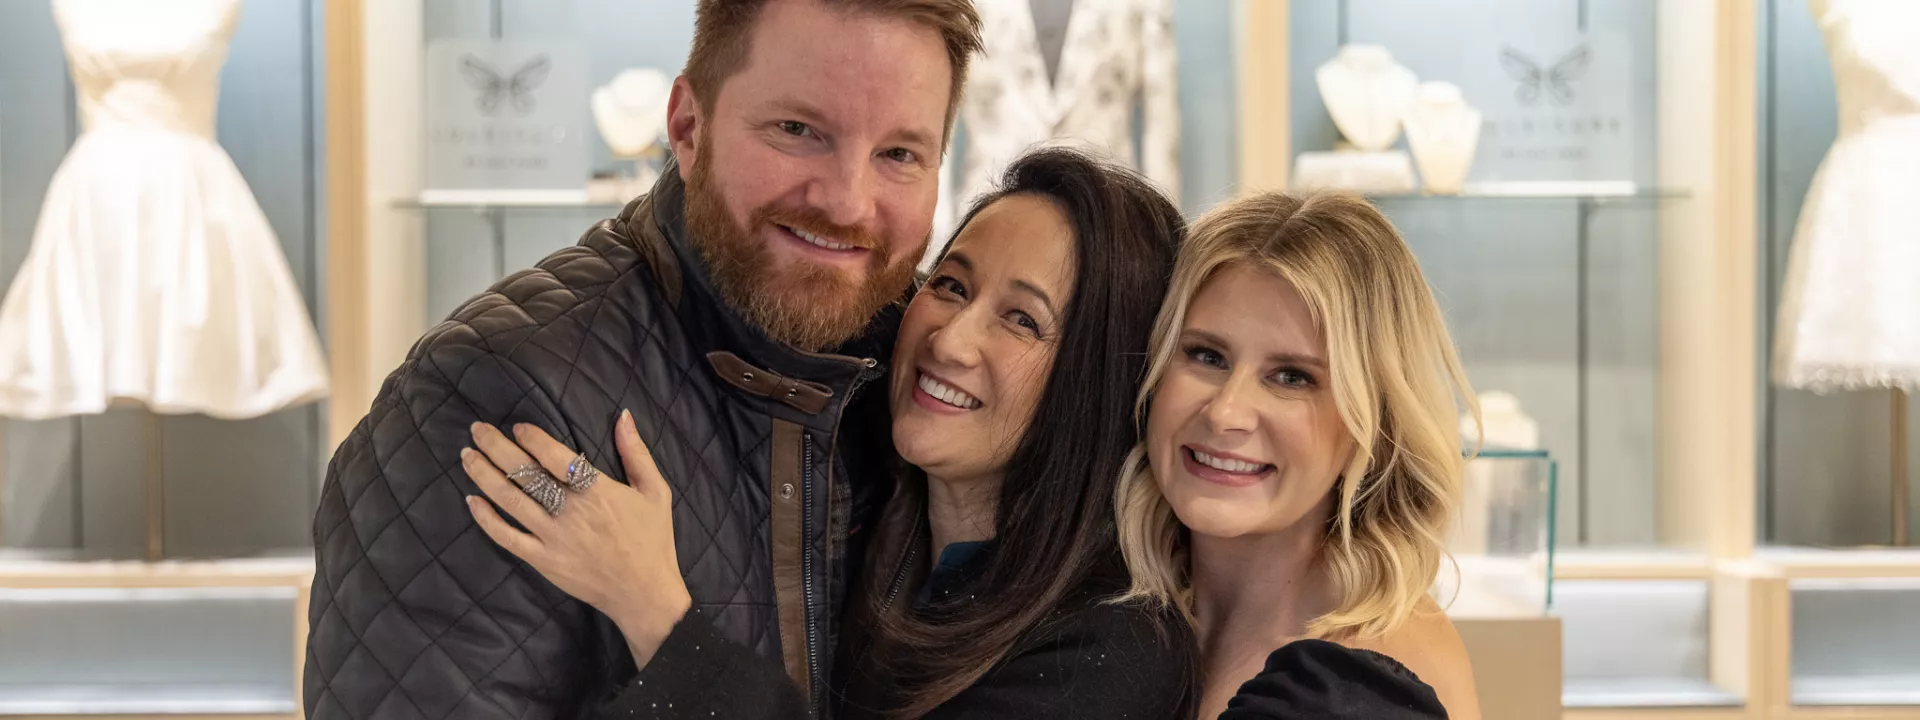 Dan Riggs, Sonja Babich and Luly Yang embracing